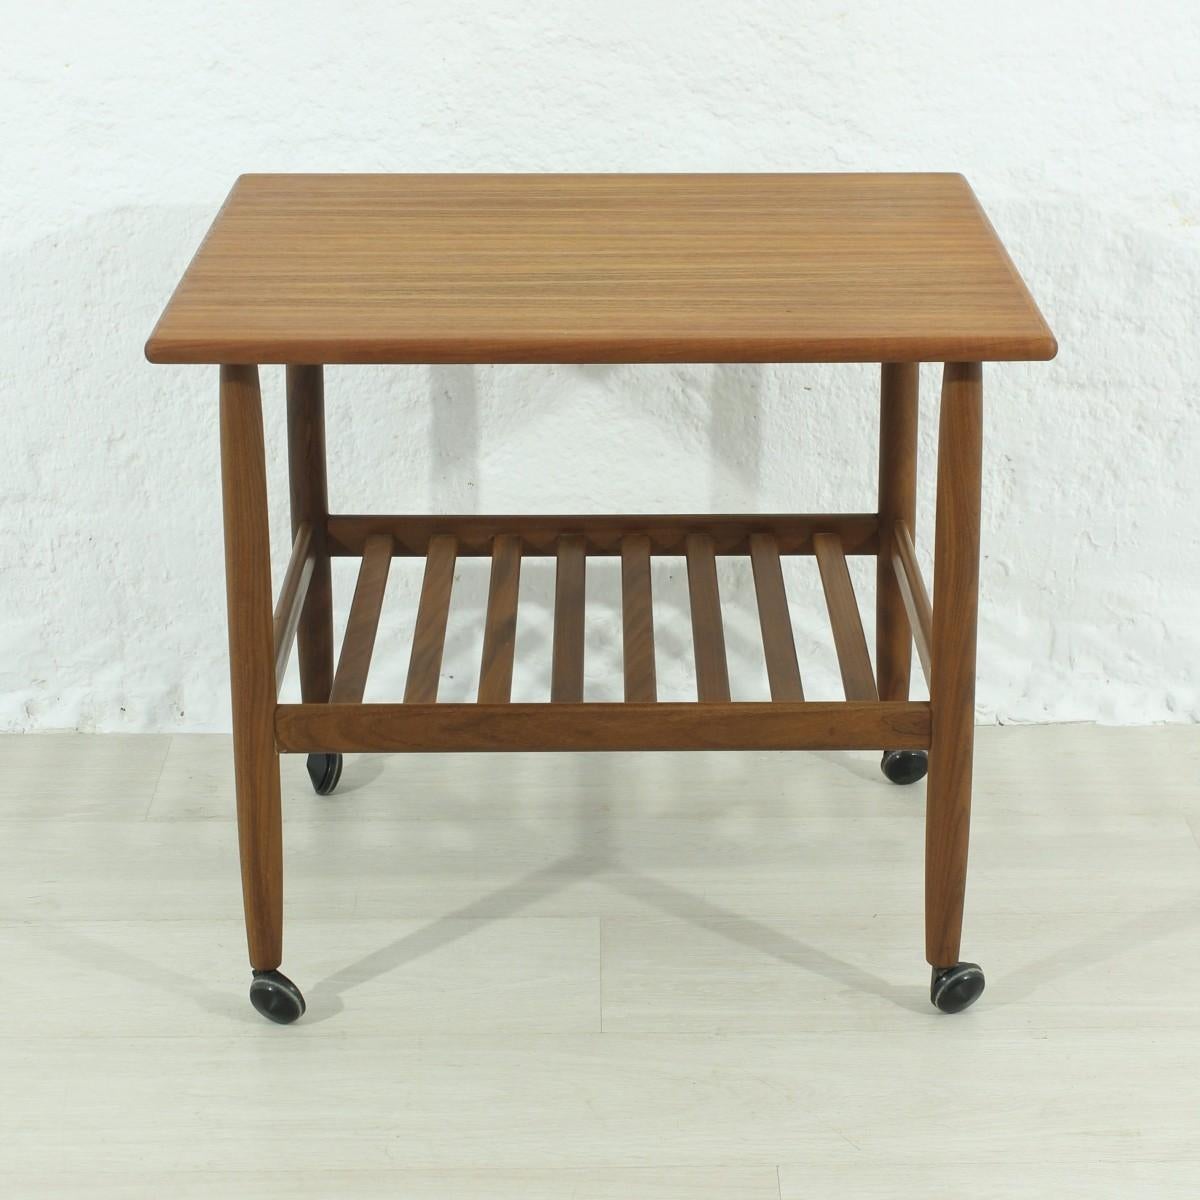 Material: Teak partly veneered; smoothed and oiled